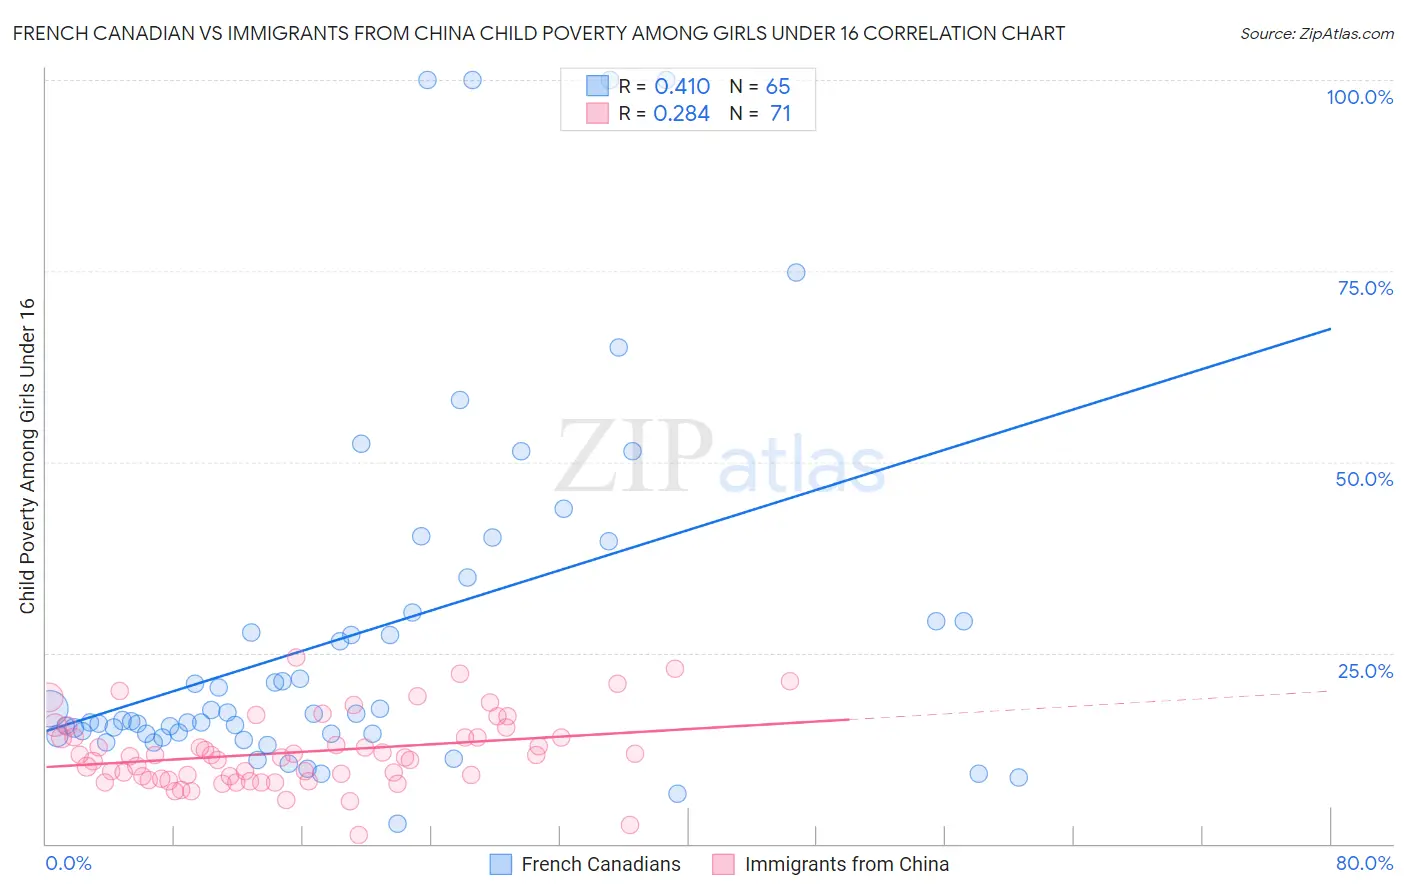 French Canadian vs Immigrants from China Child Poverty Among Girls Under 16